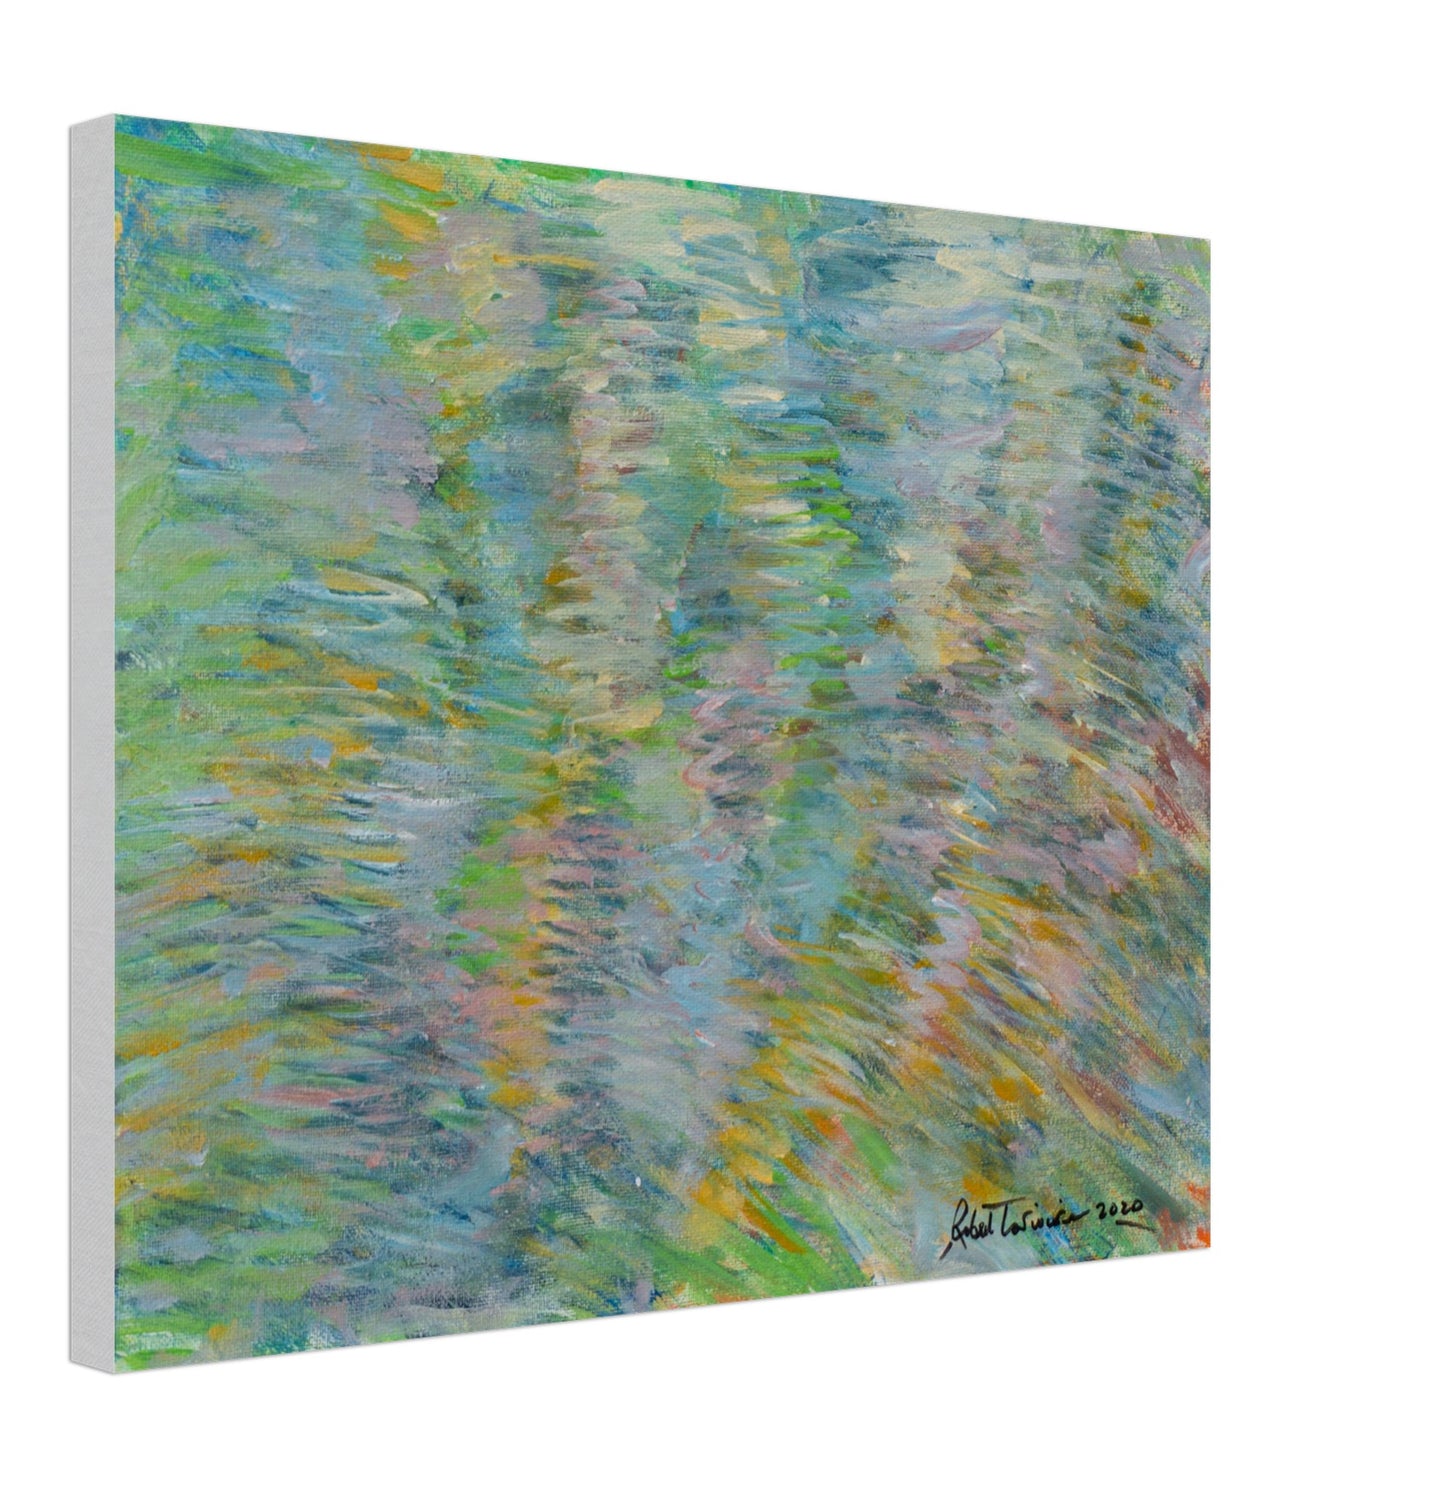 Autumn Colours In Water - Canvas